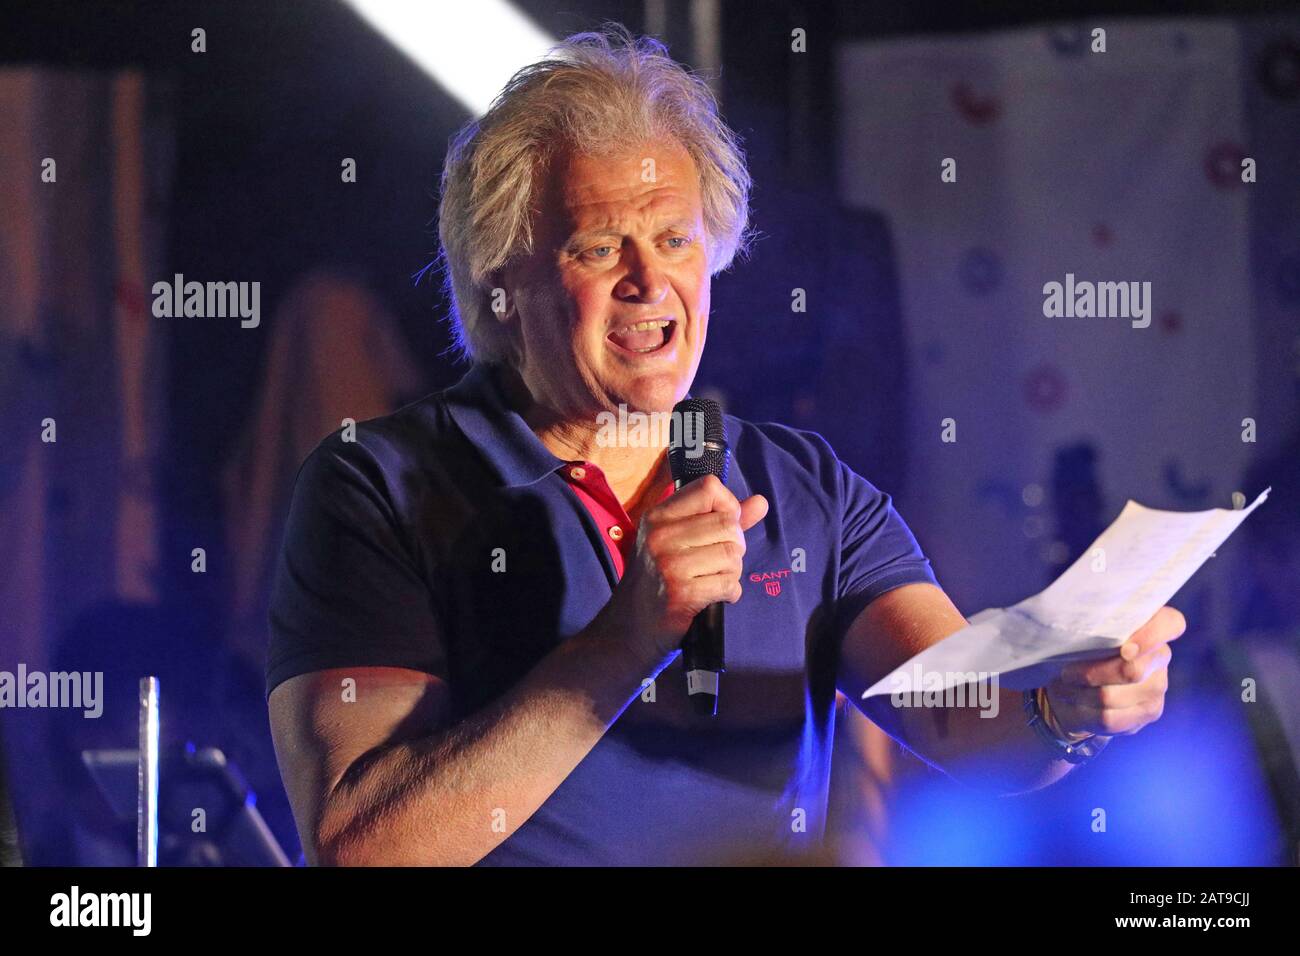 Tim Martin, Chairman of JD Wetherspoon, speaks to pro-Brexit supporters in Parliament Square, London, as the UK prepares to leave the European Union, ending 47 years of close and sometimes uncomfortable ties to Brussels. Stock Photo